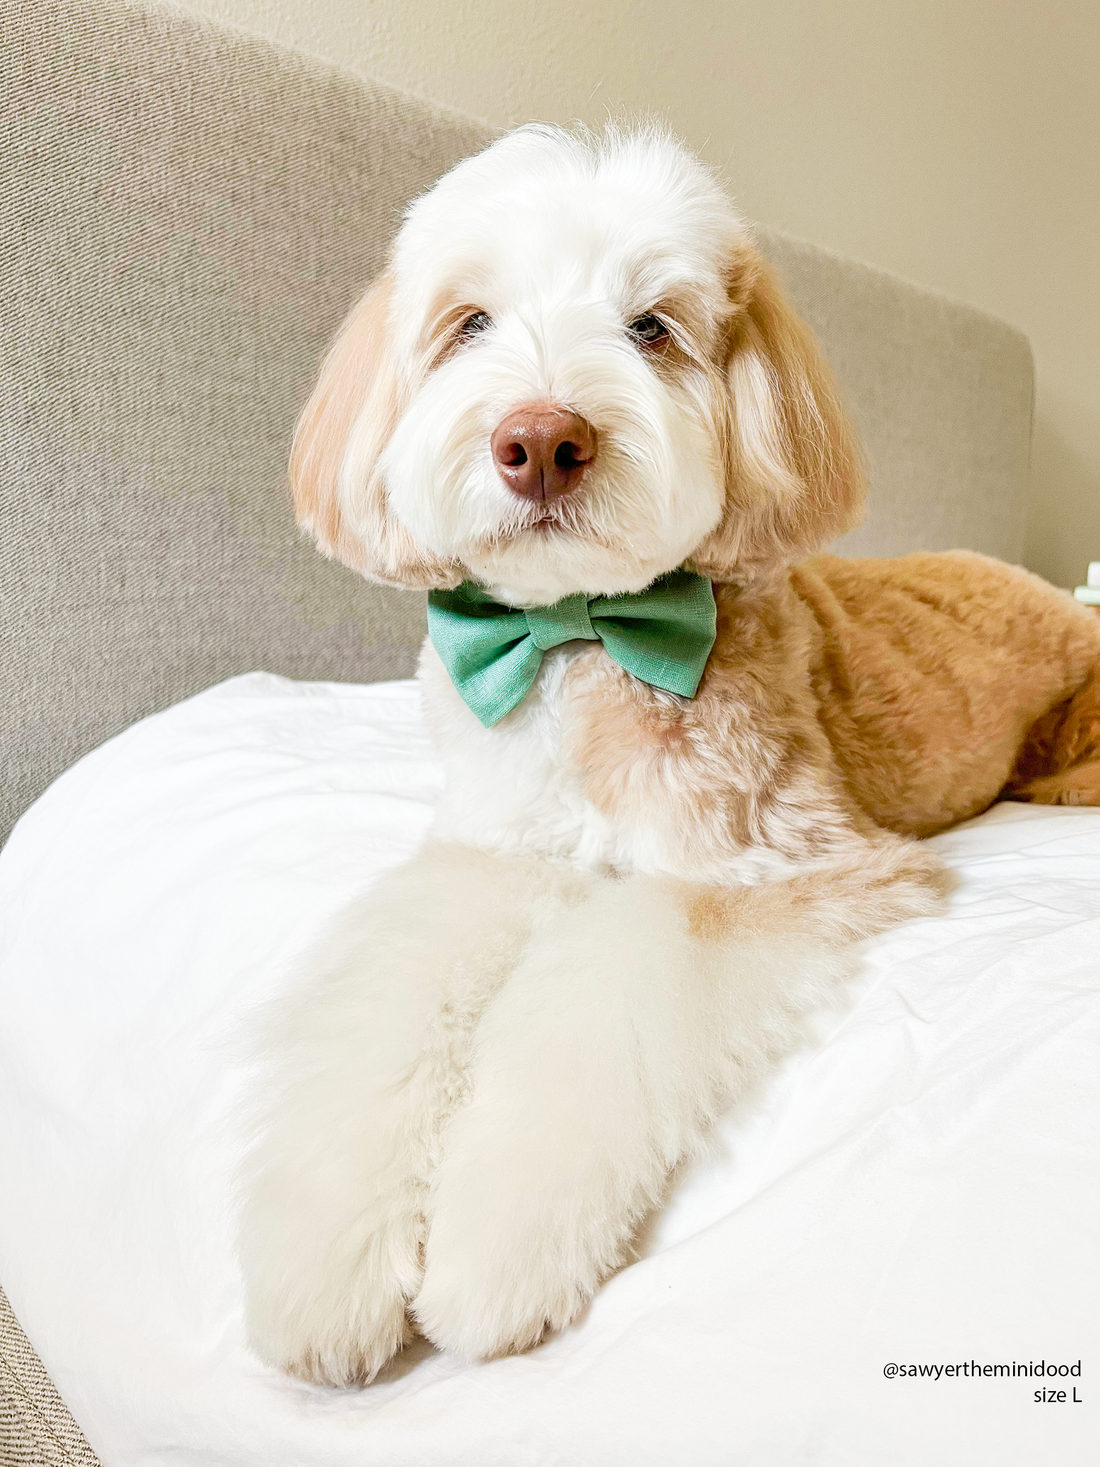 Sage Green Linen Match Dog Bow Tie | Snap Over Collar Bow Tie | Shop Sunny Tails